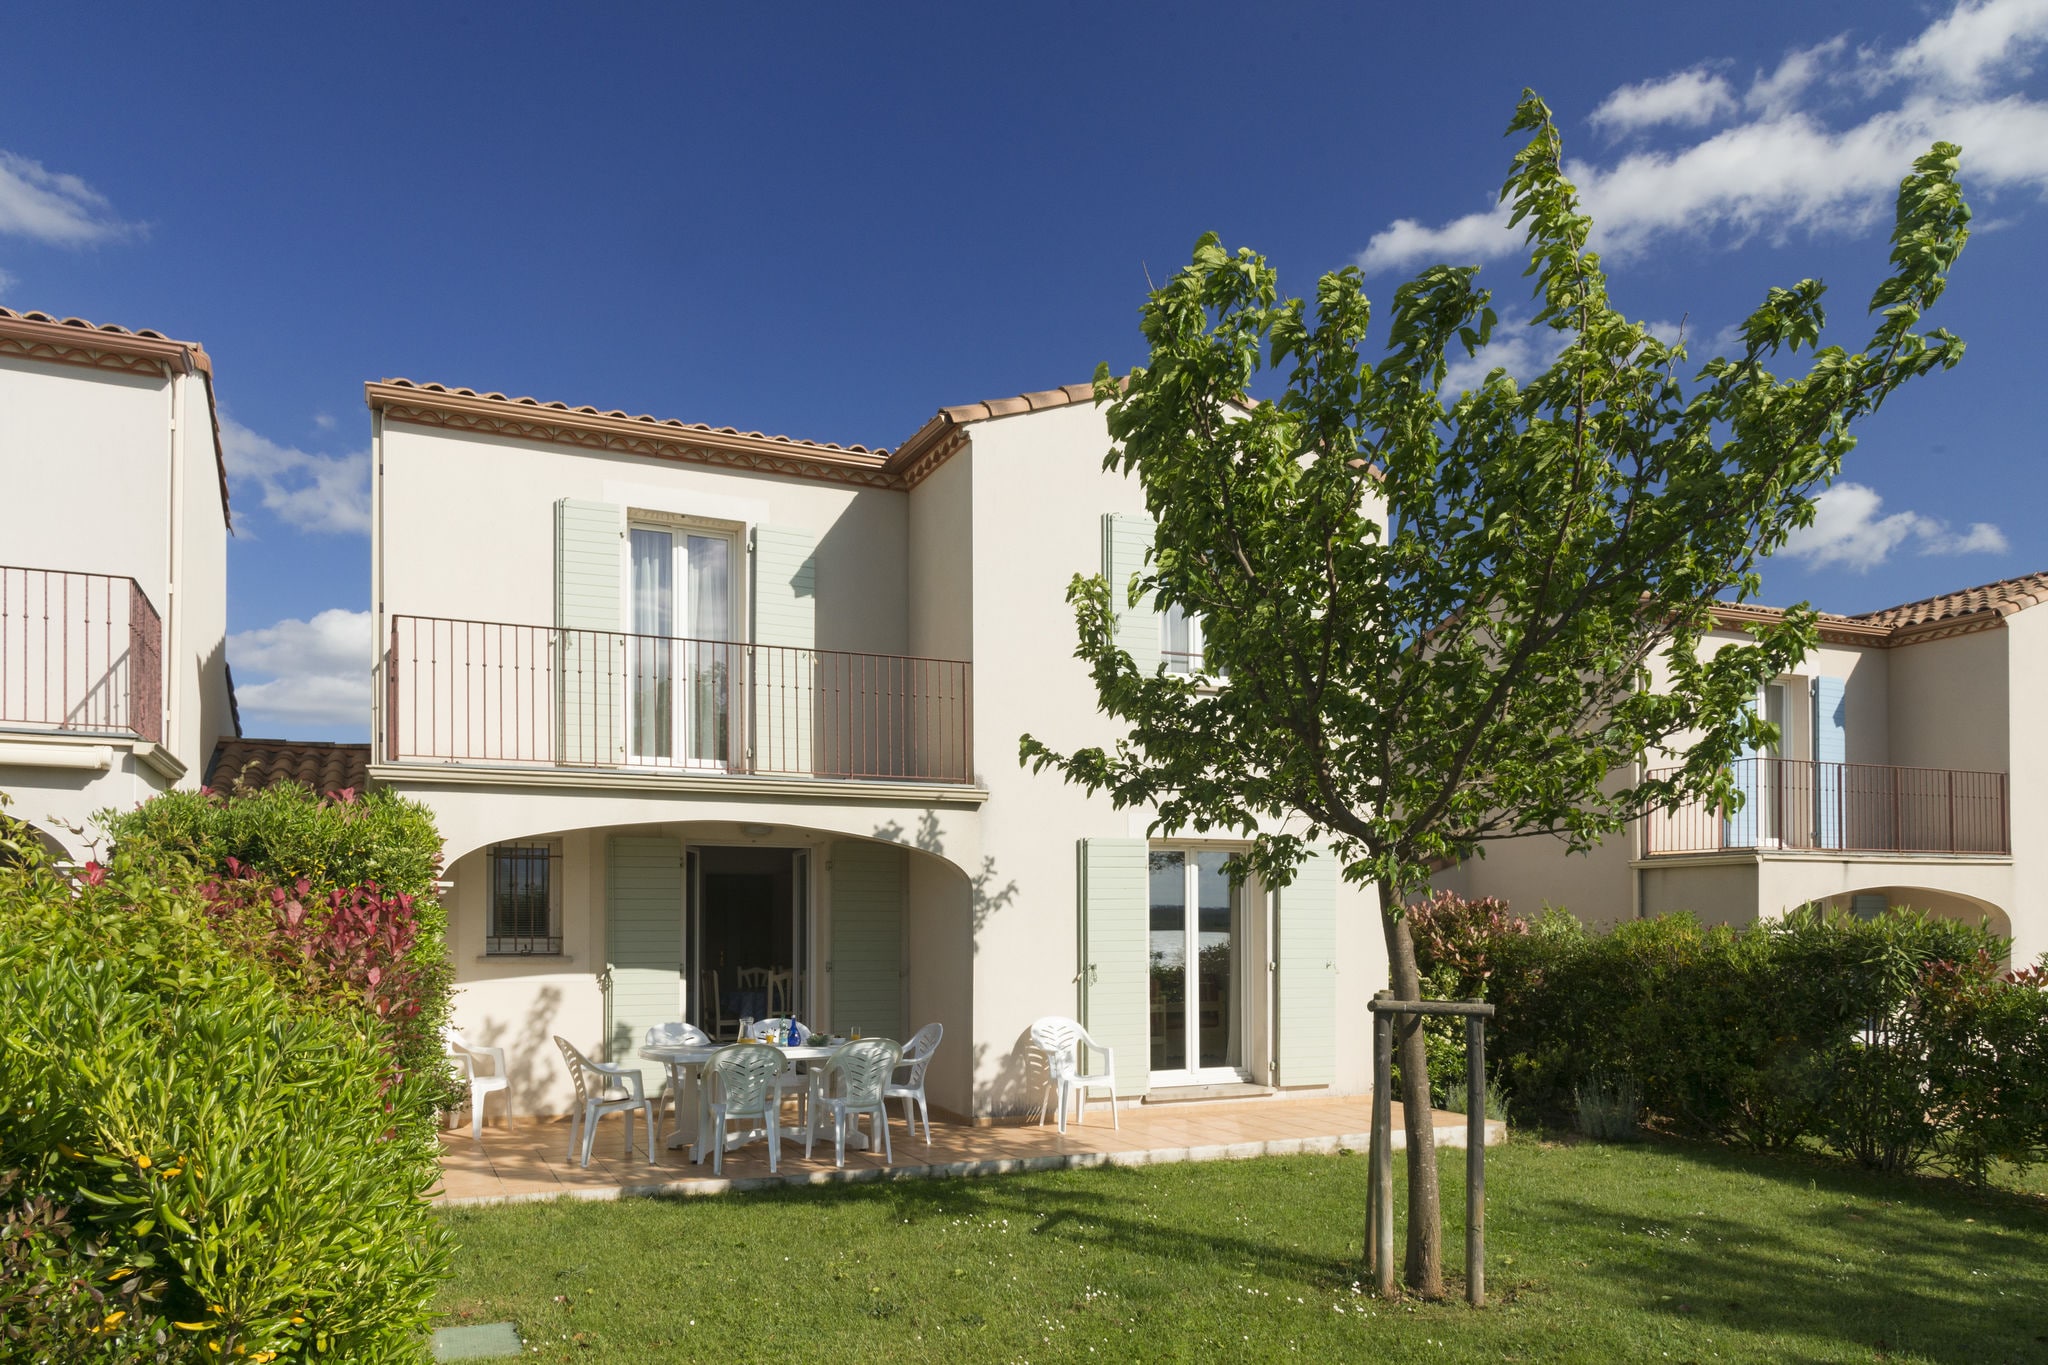 Attached house with terrace or loggia located in Languedoc